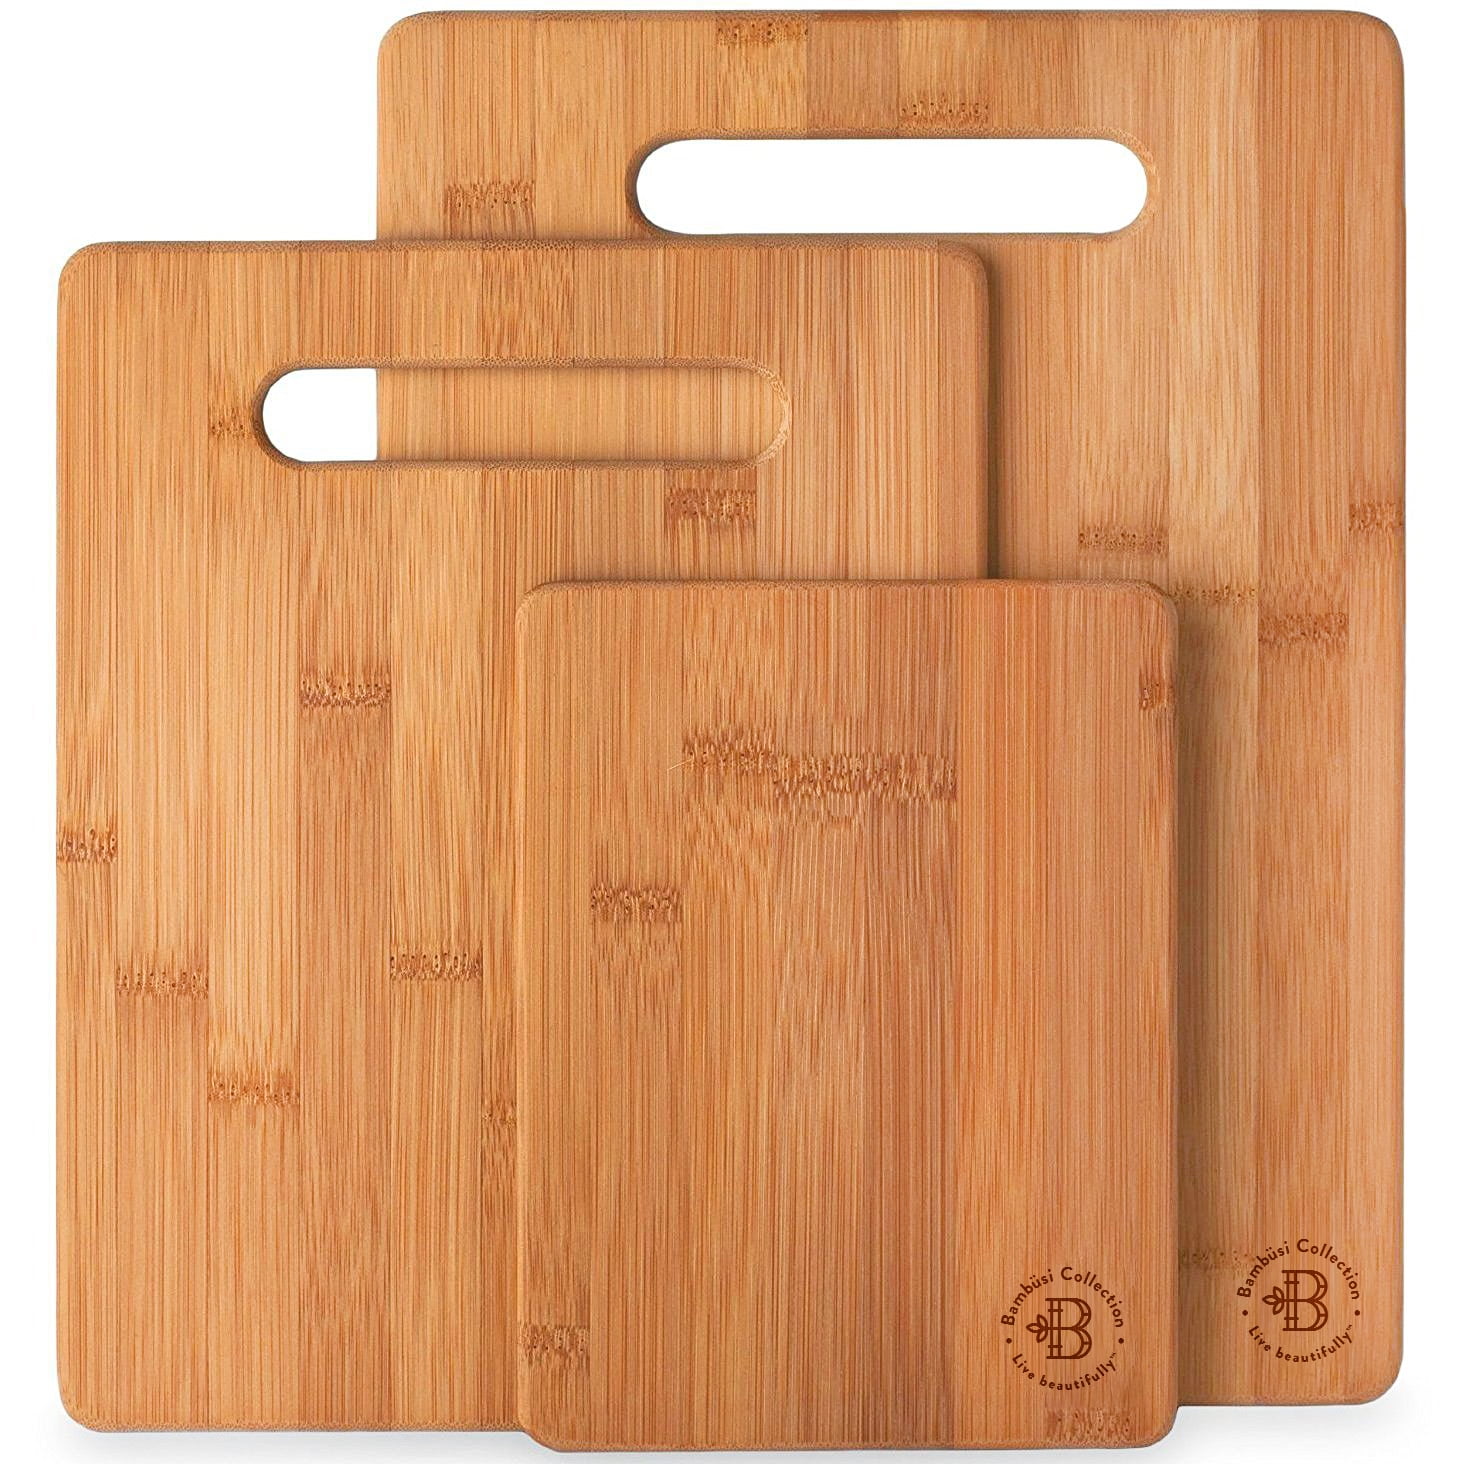 Bamboo Cutting Board Tray 12x12x0.5 3 Pack Eco Friendly Wooden Serving Trays